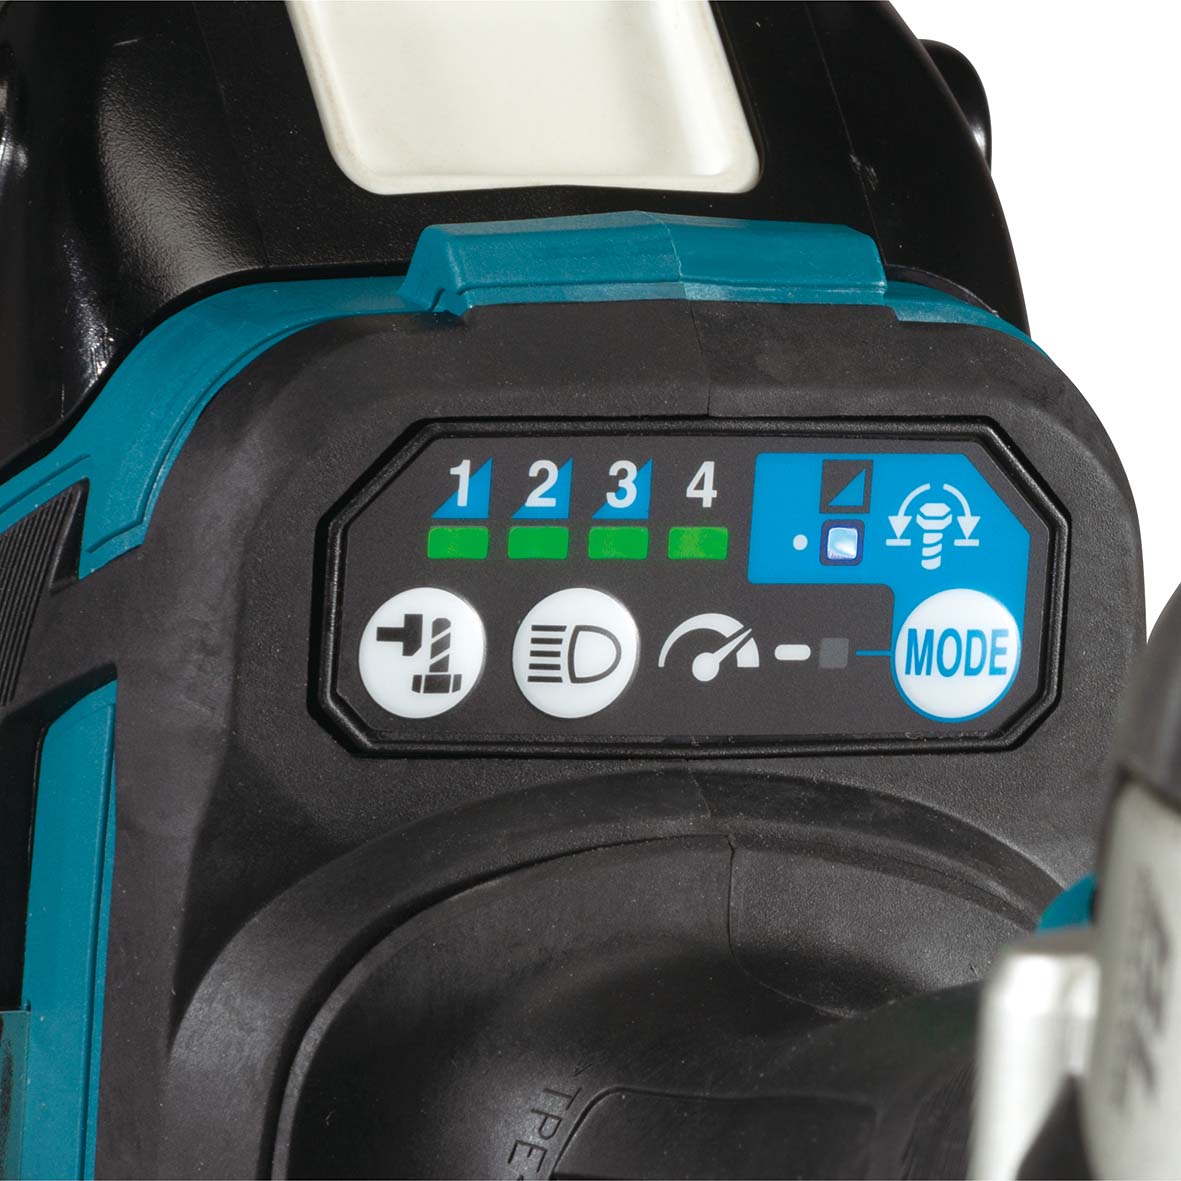 18V 1/2" Brushless Impact Wrench Kit DTW700RTJ by Makita